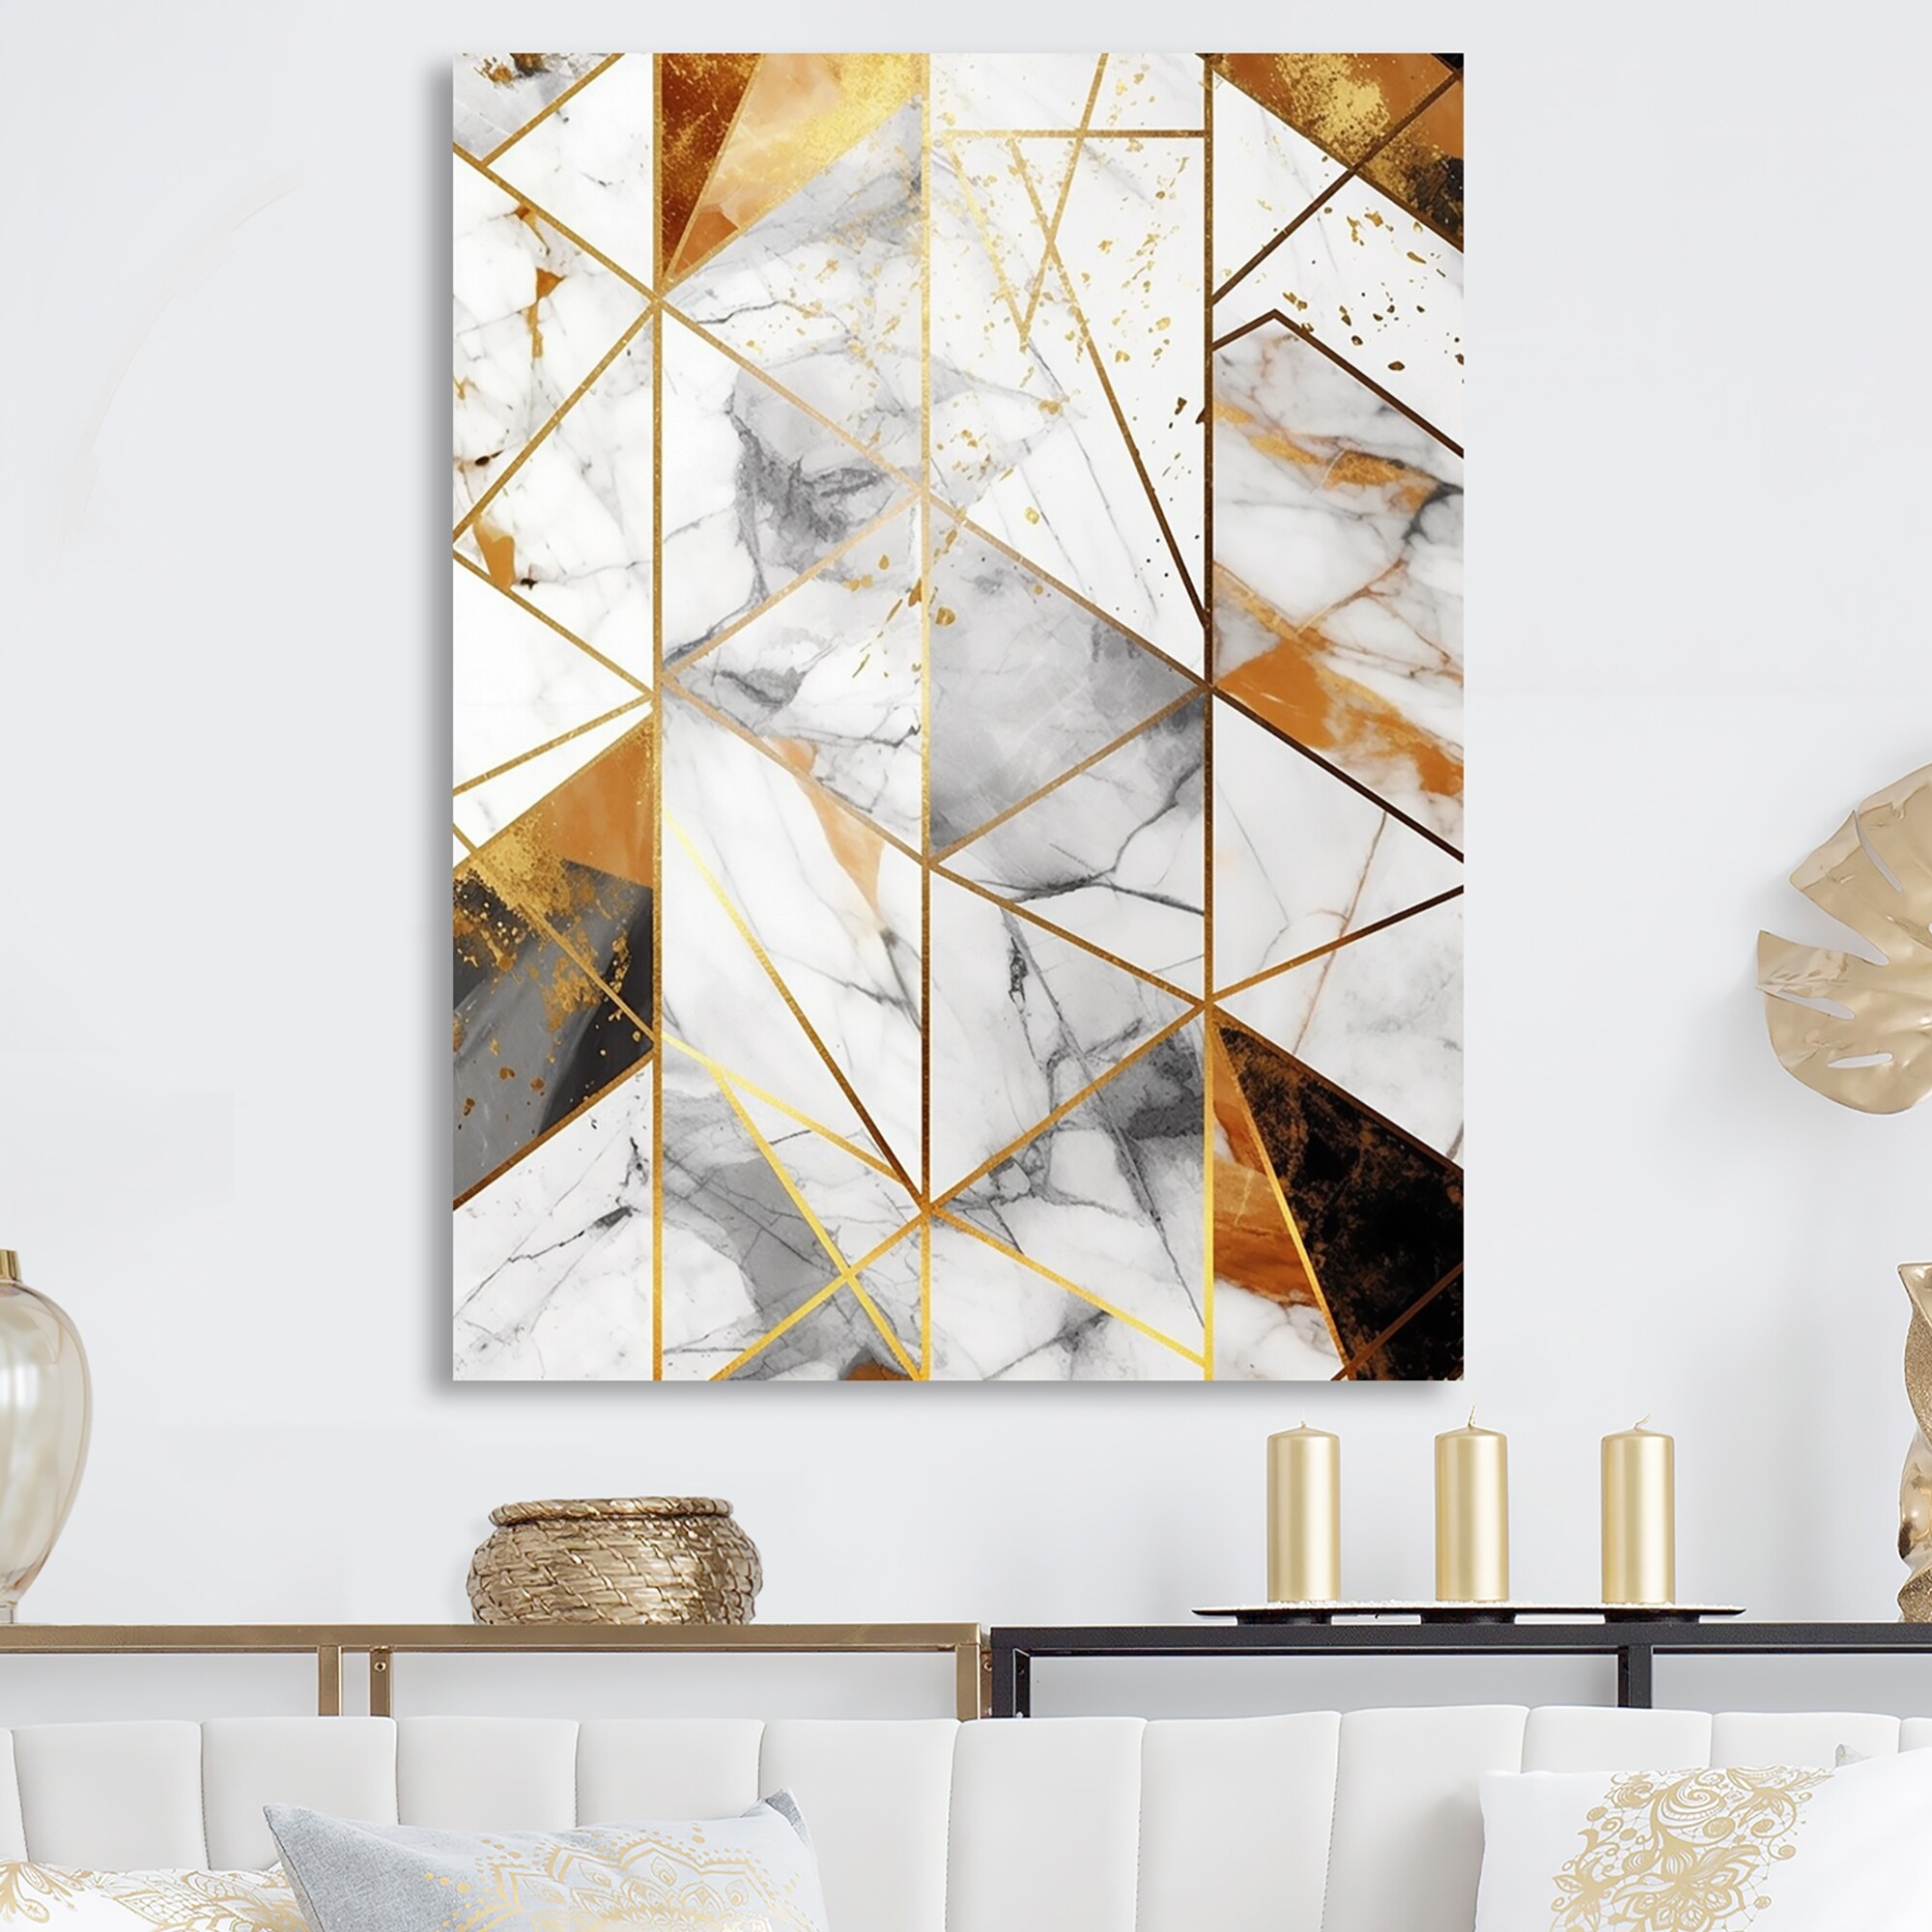 https://ak1.ostkcdn.com/images/products/is/images/direct/7bde9be6b00a22512ff9b51a0648b71e6b010a0a/Designart-%22Exploring-Golden-Abstracted-Symmetry-V%22-Modern-Geometric-Metal-Wall-Art.jpg